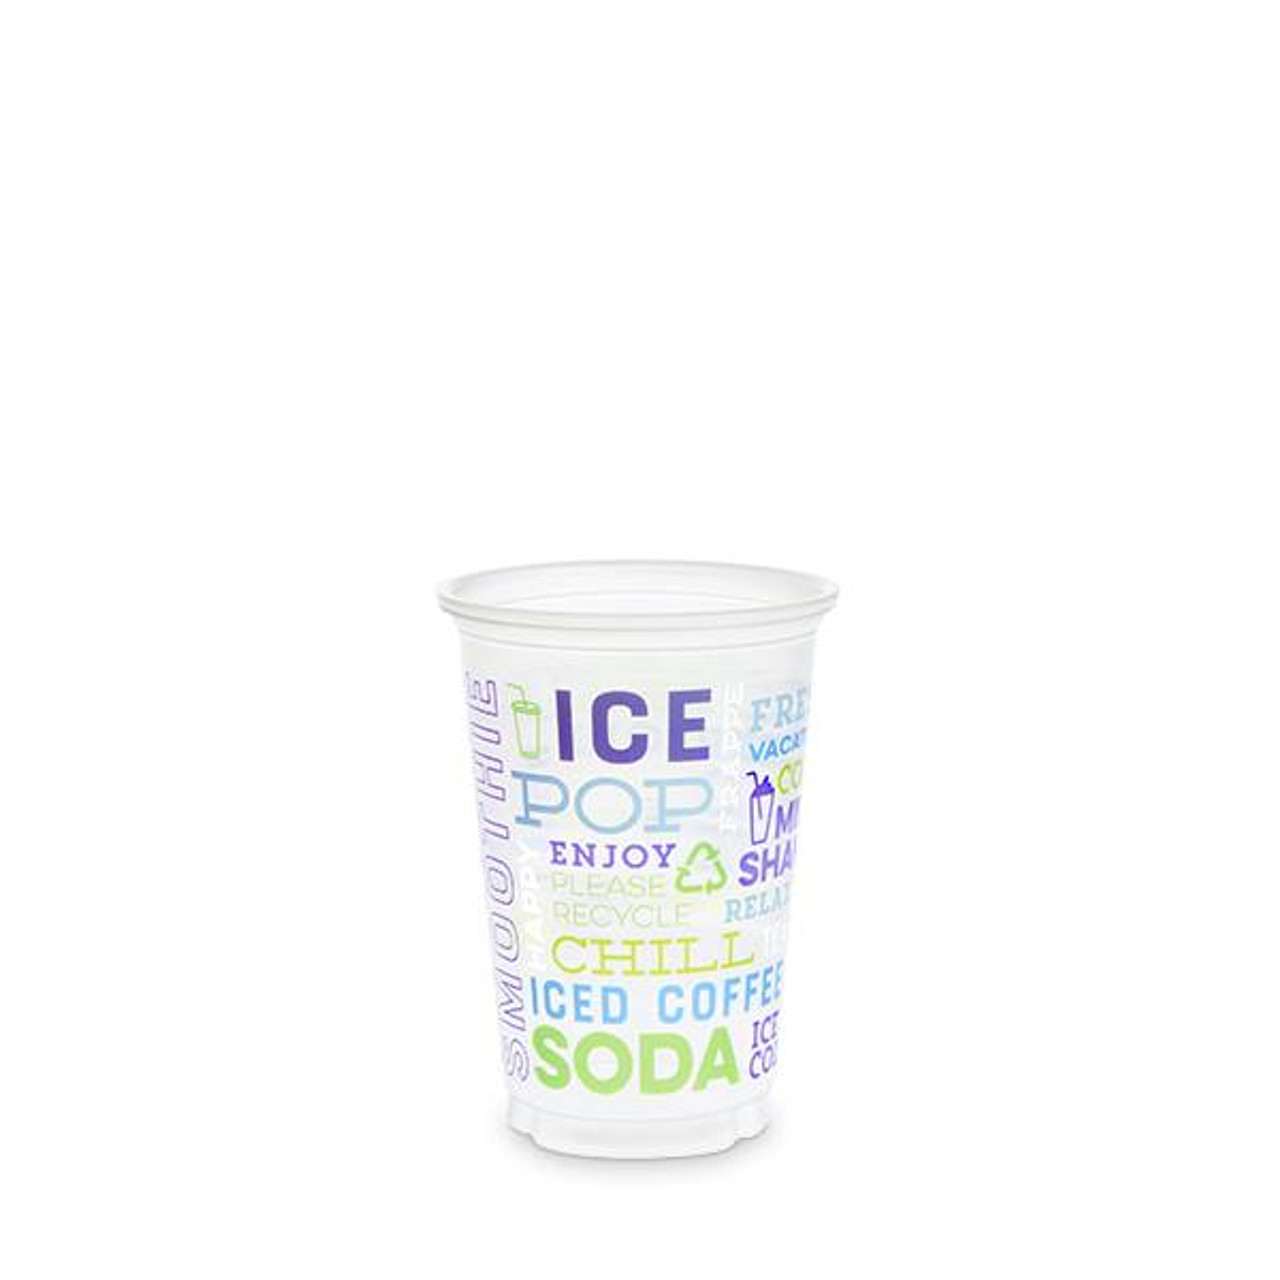 https://cdn11.bigcommerce.com/s-w7jcic88/images/stencil/1280x1280/products/1156/2656/st31016cp_berry%20ice%20cold%20refresh%20design%20cup%20-%20trans%20-%2016%20oz__40581.1695399577.jpg?c=2